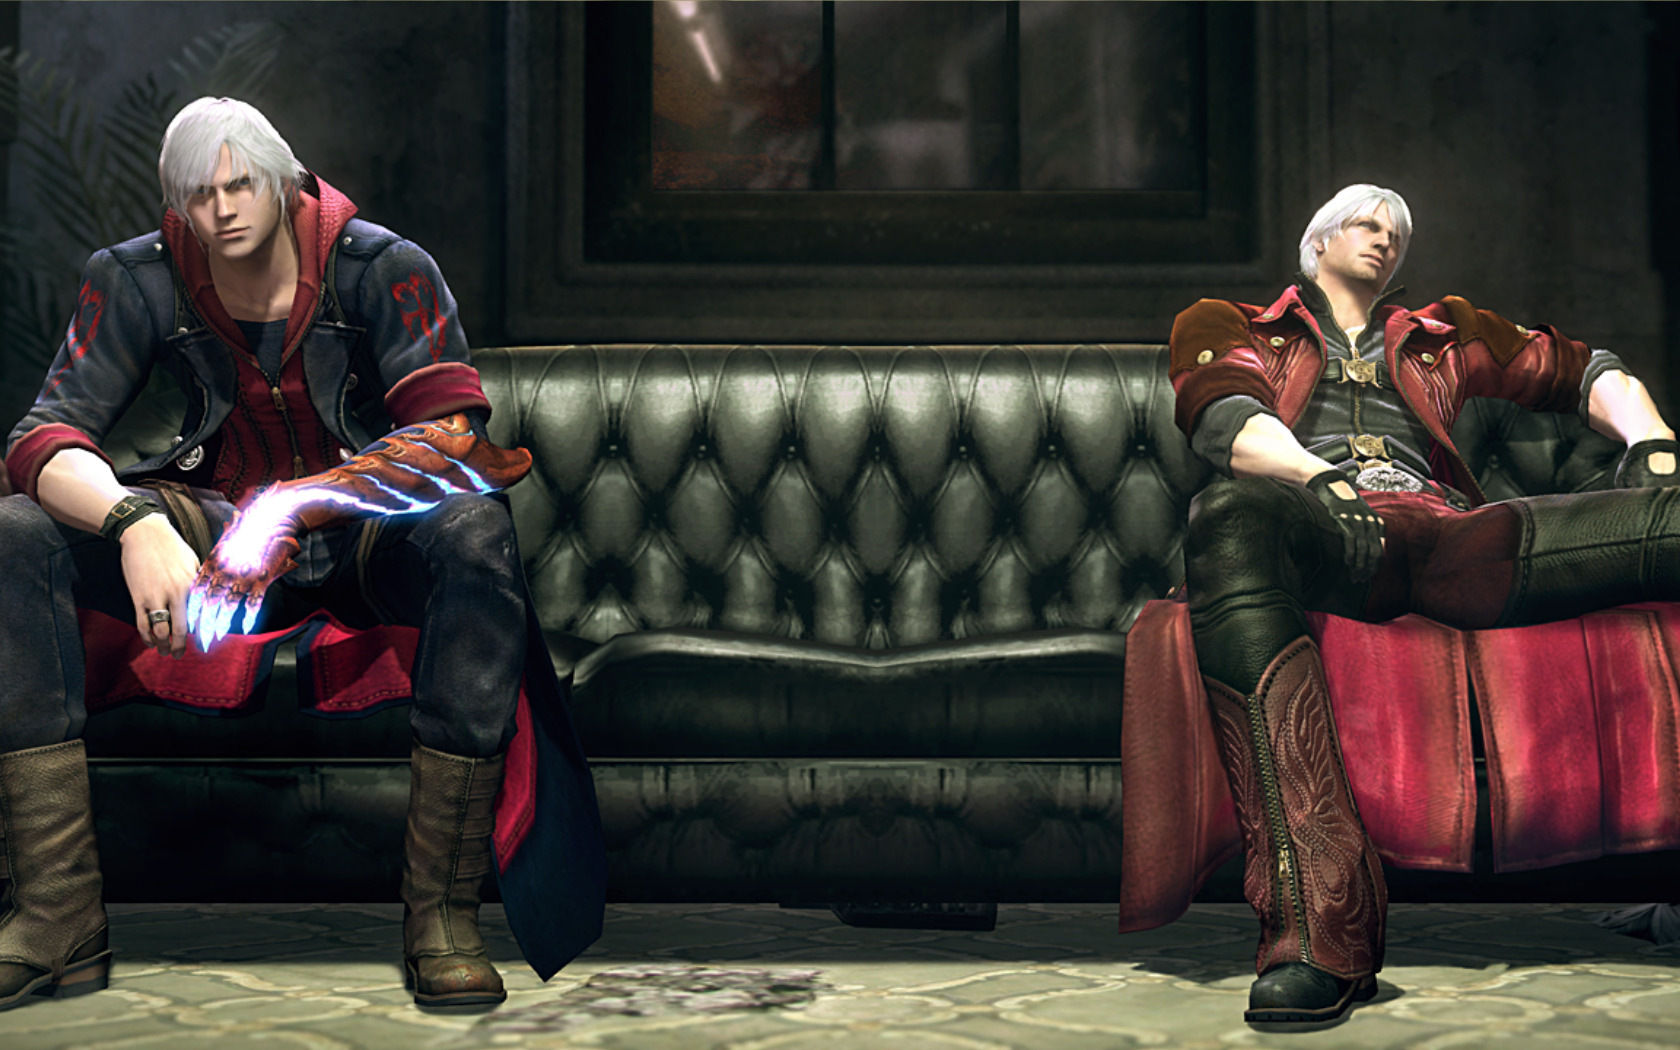 download dmc devil may cry